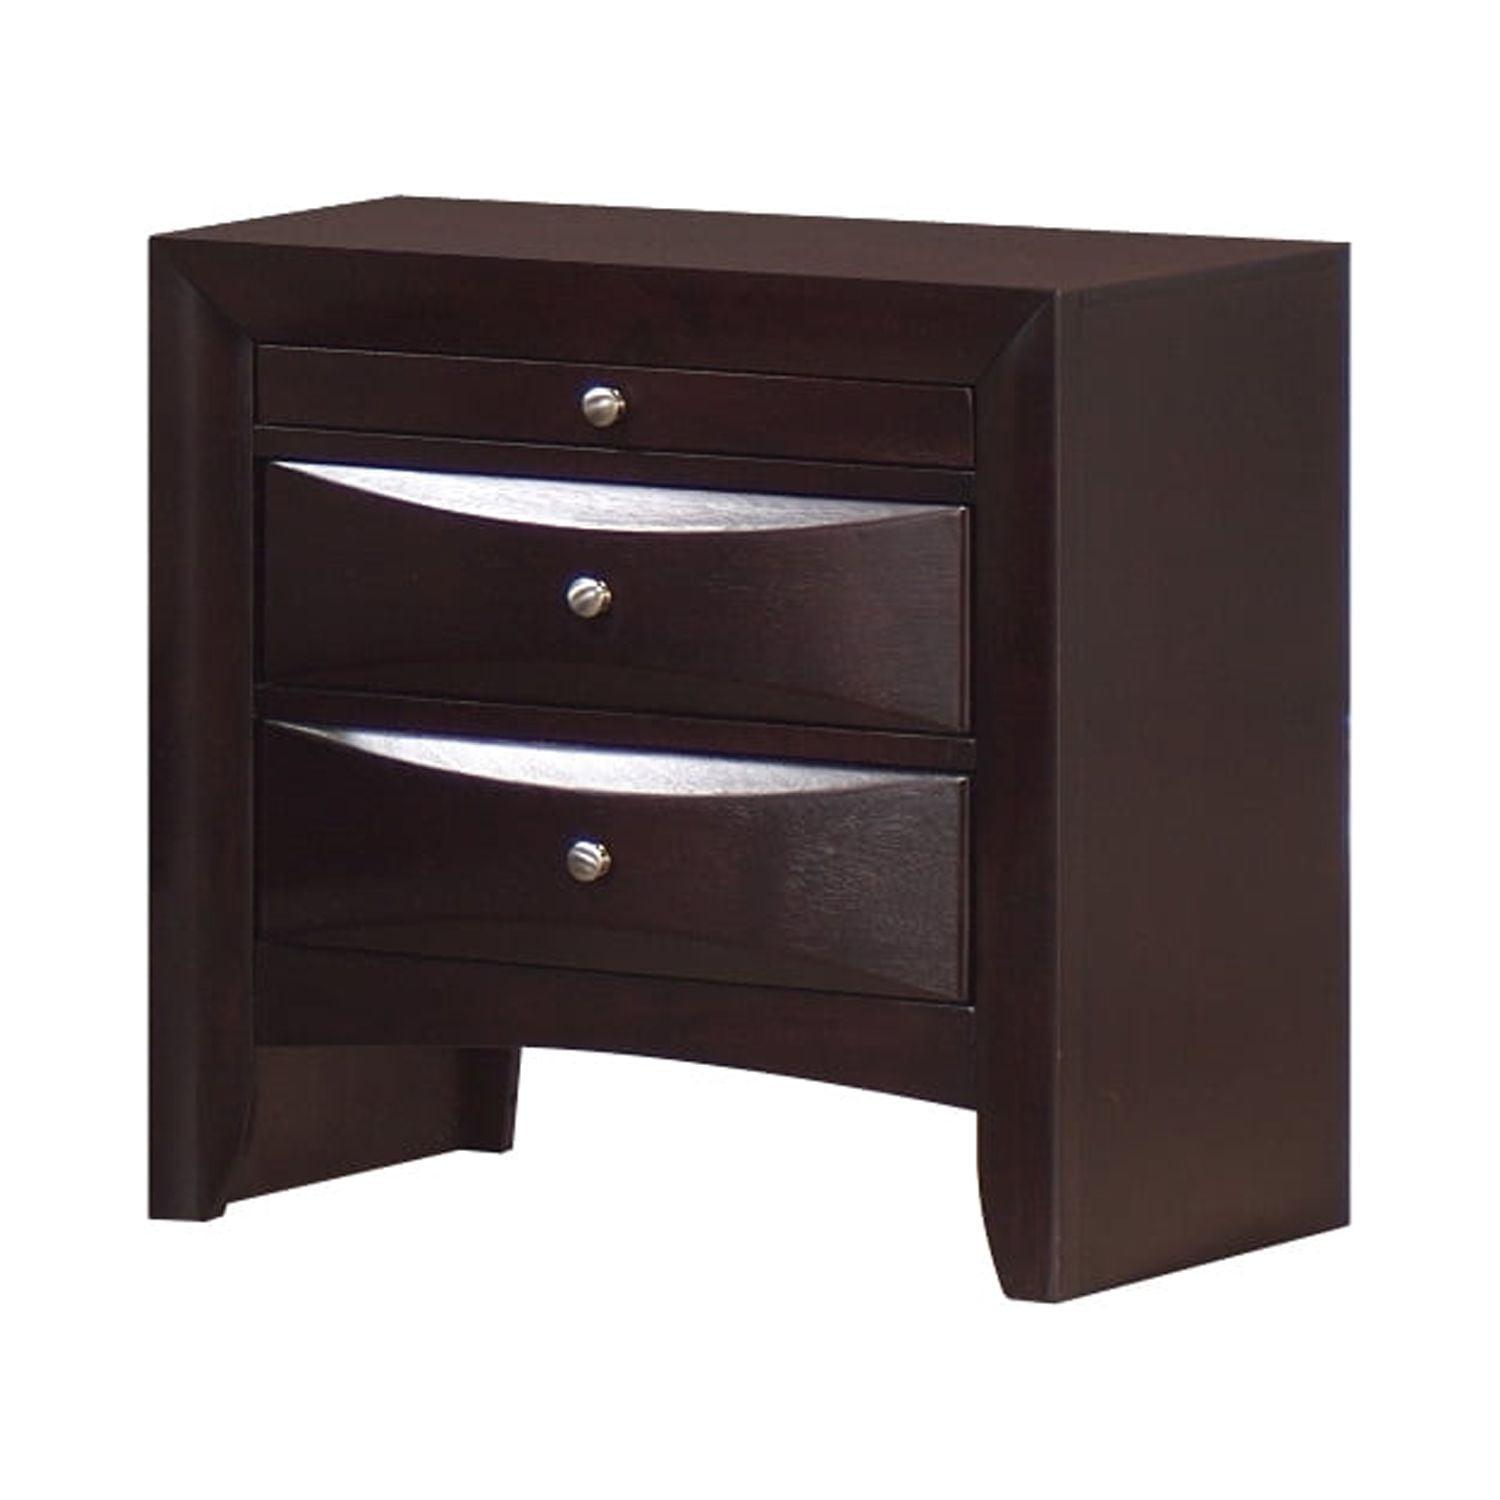 Transitional Mahogany 2-Drawer Nightstand in Rich Brown